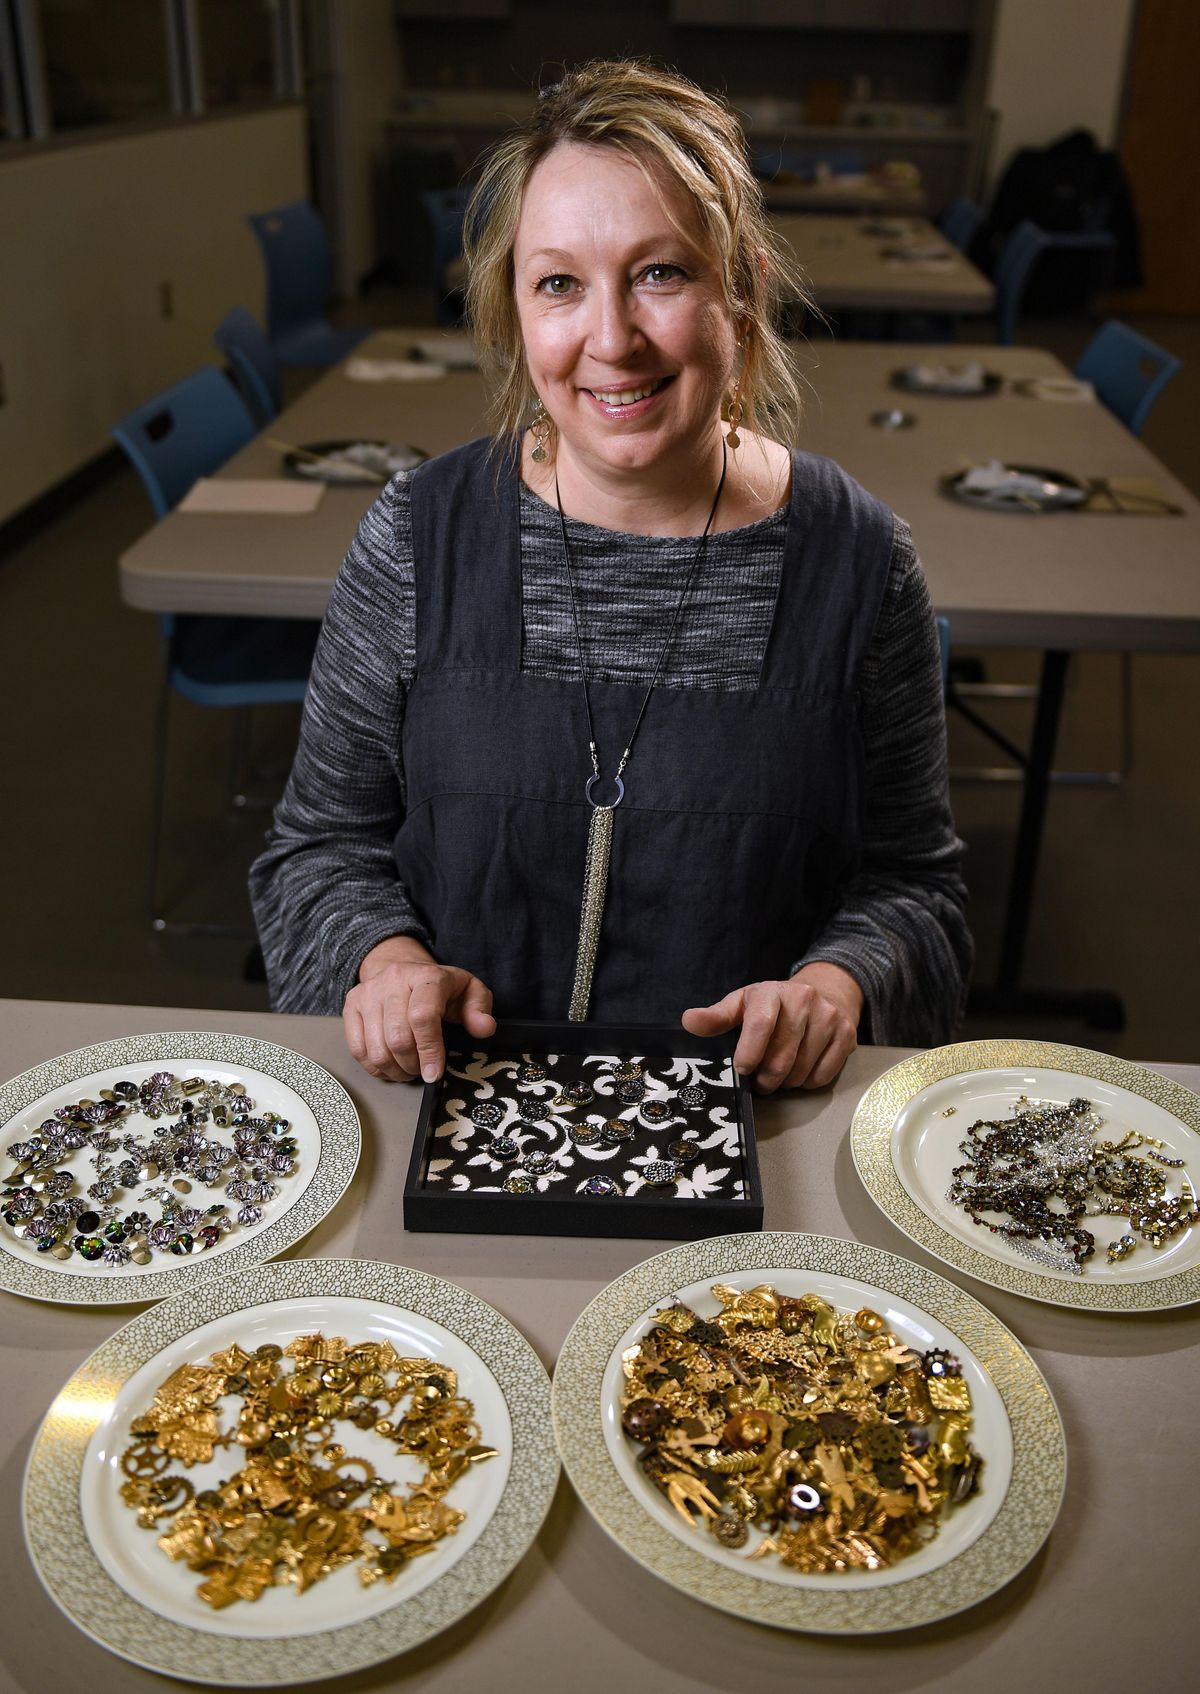 Jewelry designer Sondra Barrington is the creator in residence at the North Spokane Library this month. (Colin Mulvany / The Spokesman-Review)